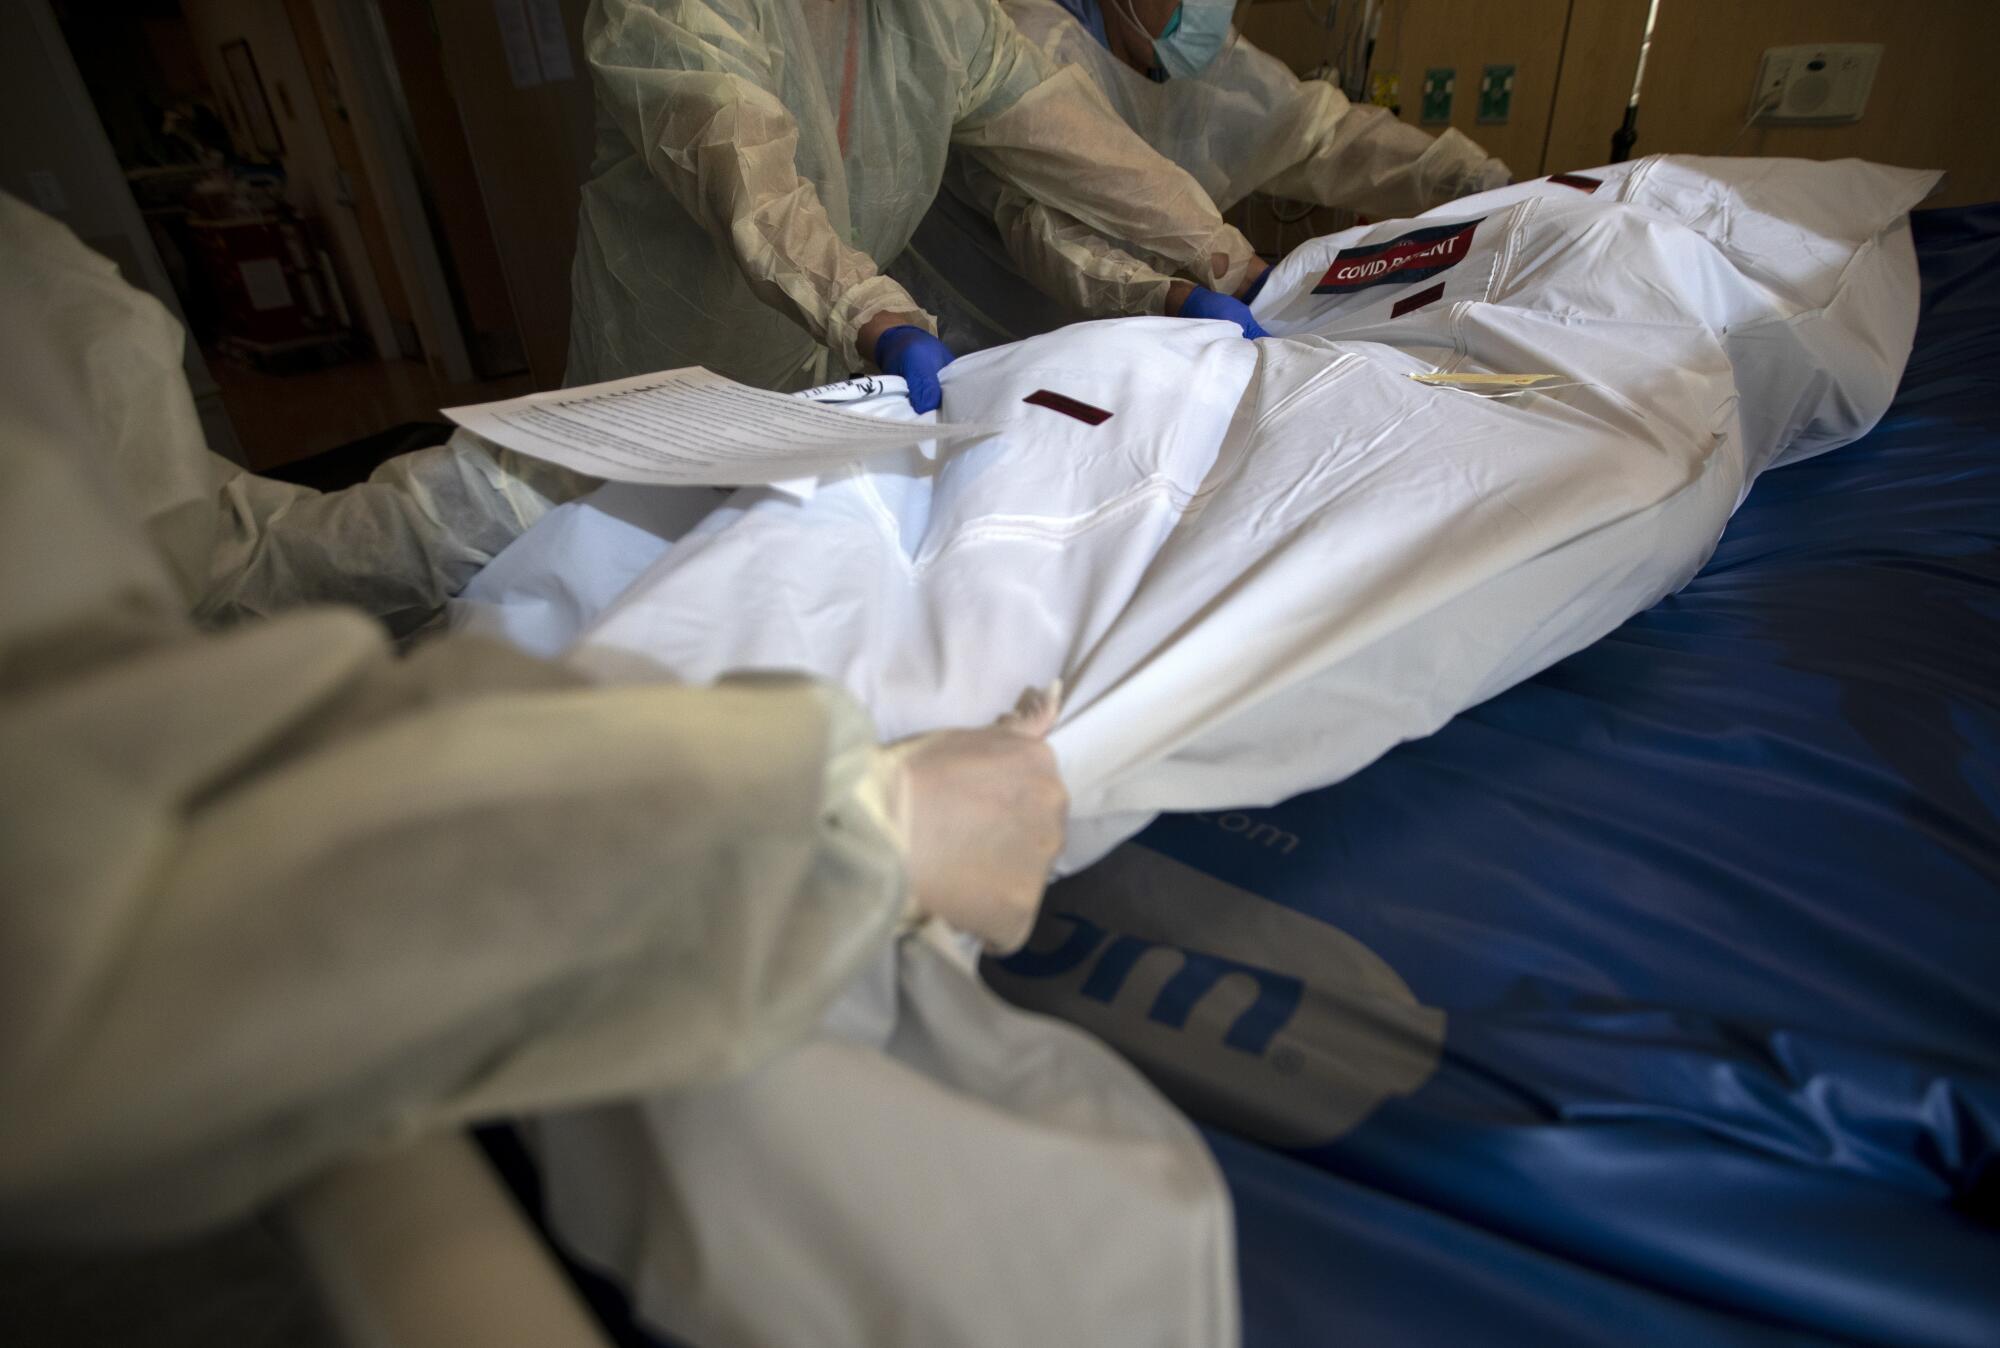 A "covid patient" label and covid stickers have been placed on the white bag containing a deceased patient. 